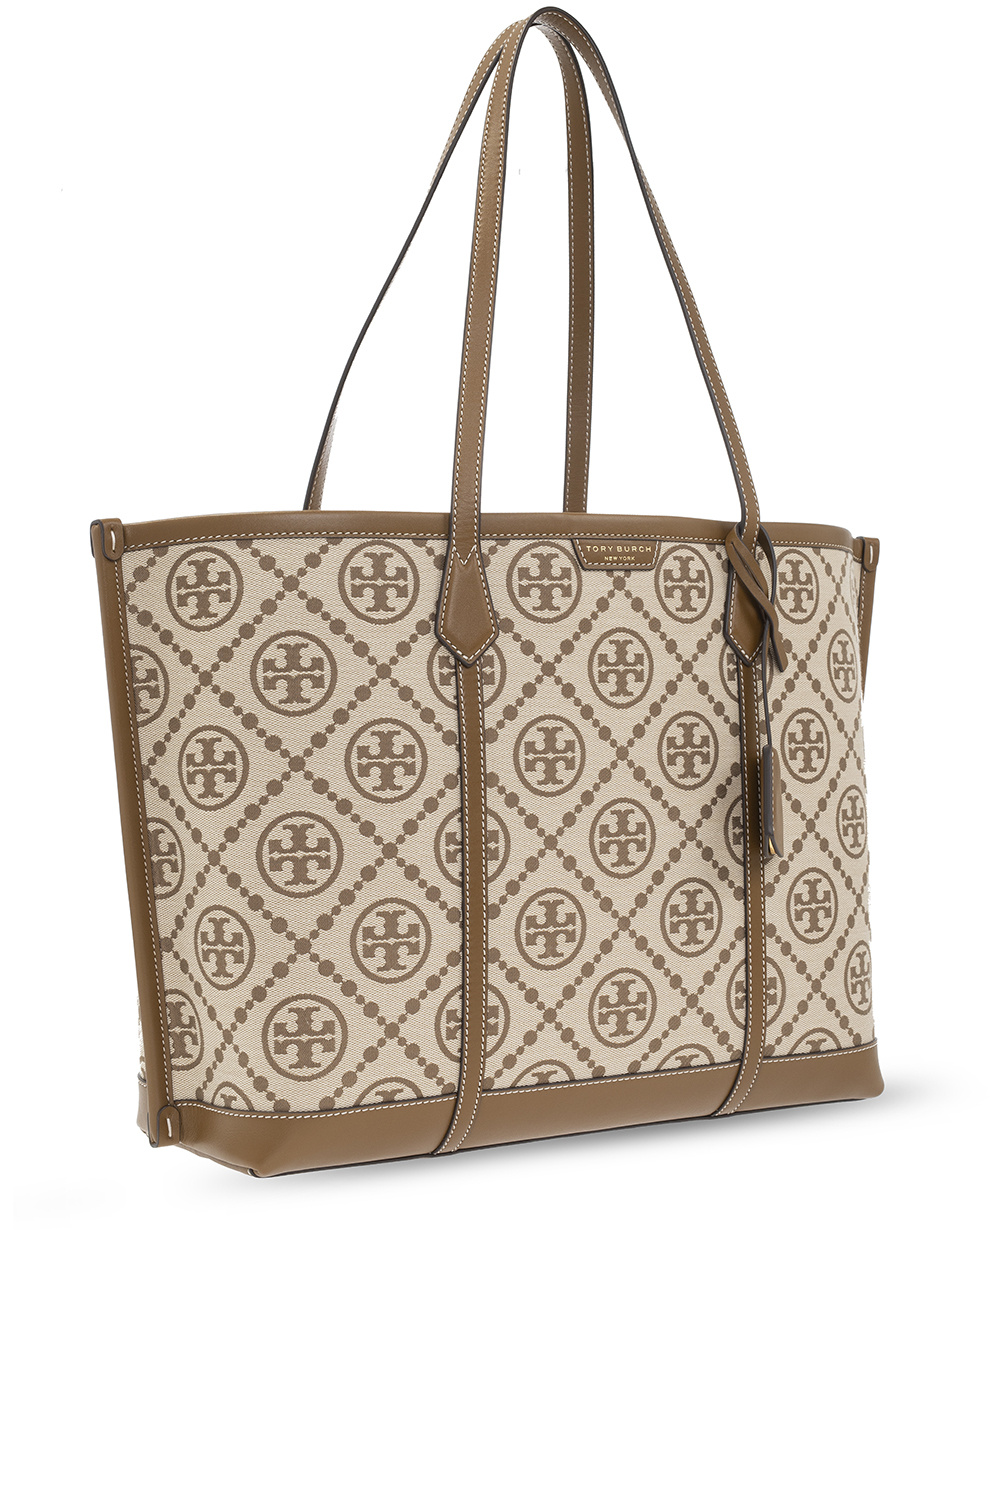 Tory Burch Perry Canvas Tote - Farfetch